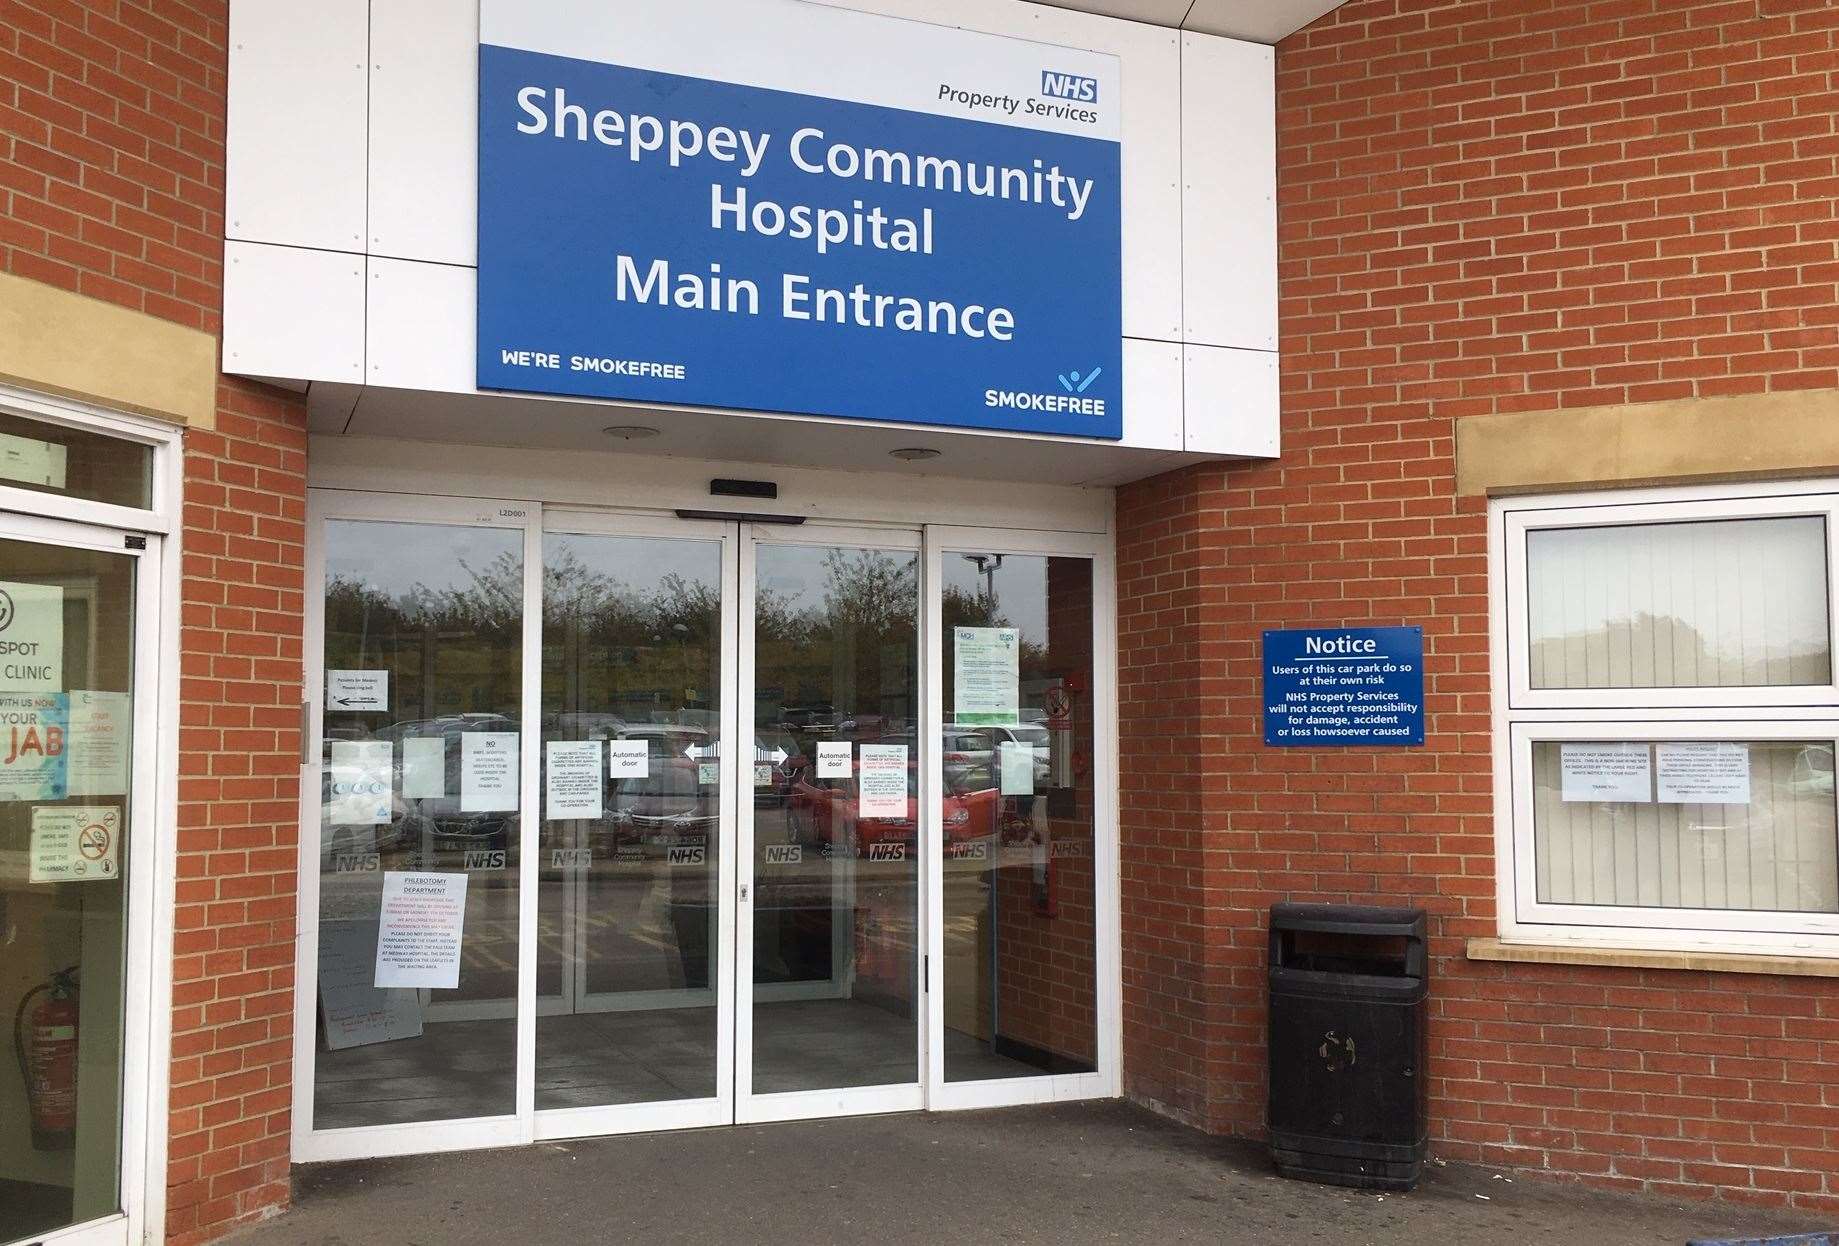 A notice was put up in the window at Sheppey Community Hospital to warn patients about a staff shortage at the beginning of October